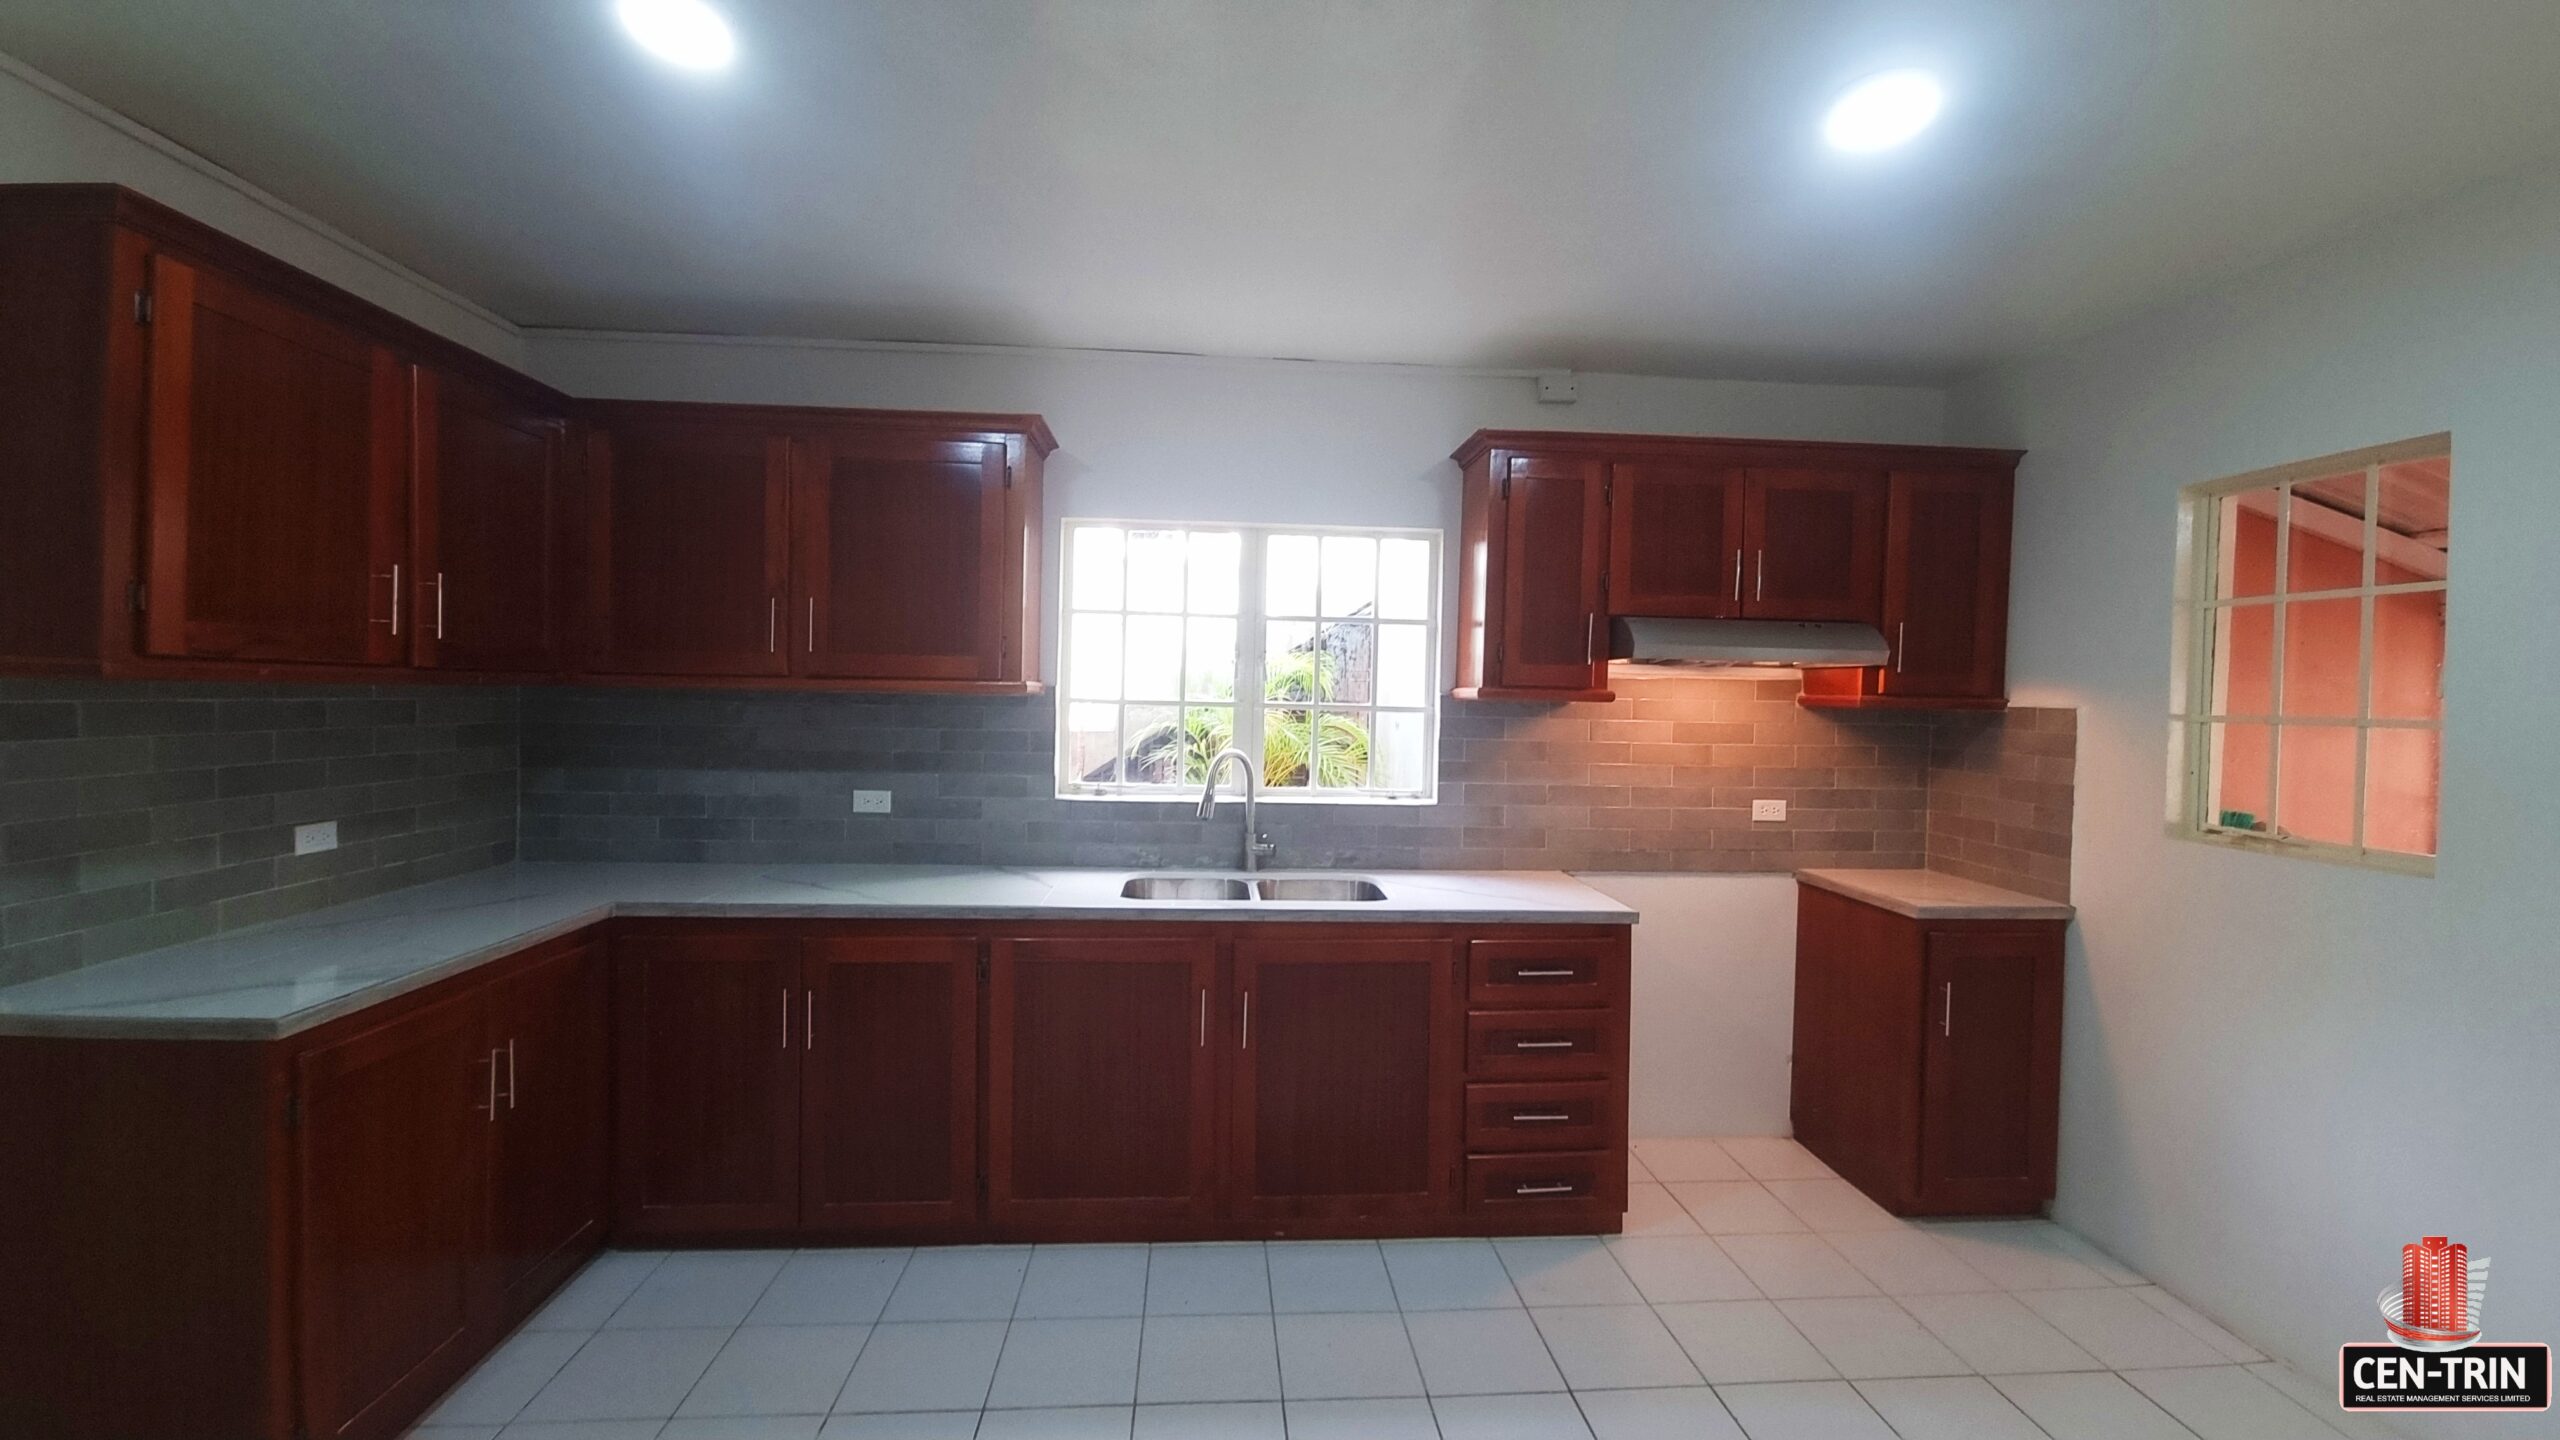 Kitchen with sink, cabinets, and window in a 3 bedroom townhouse rental.